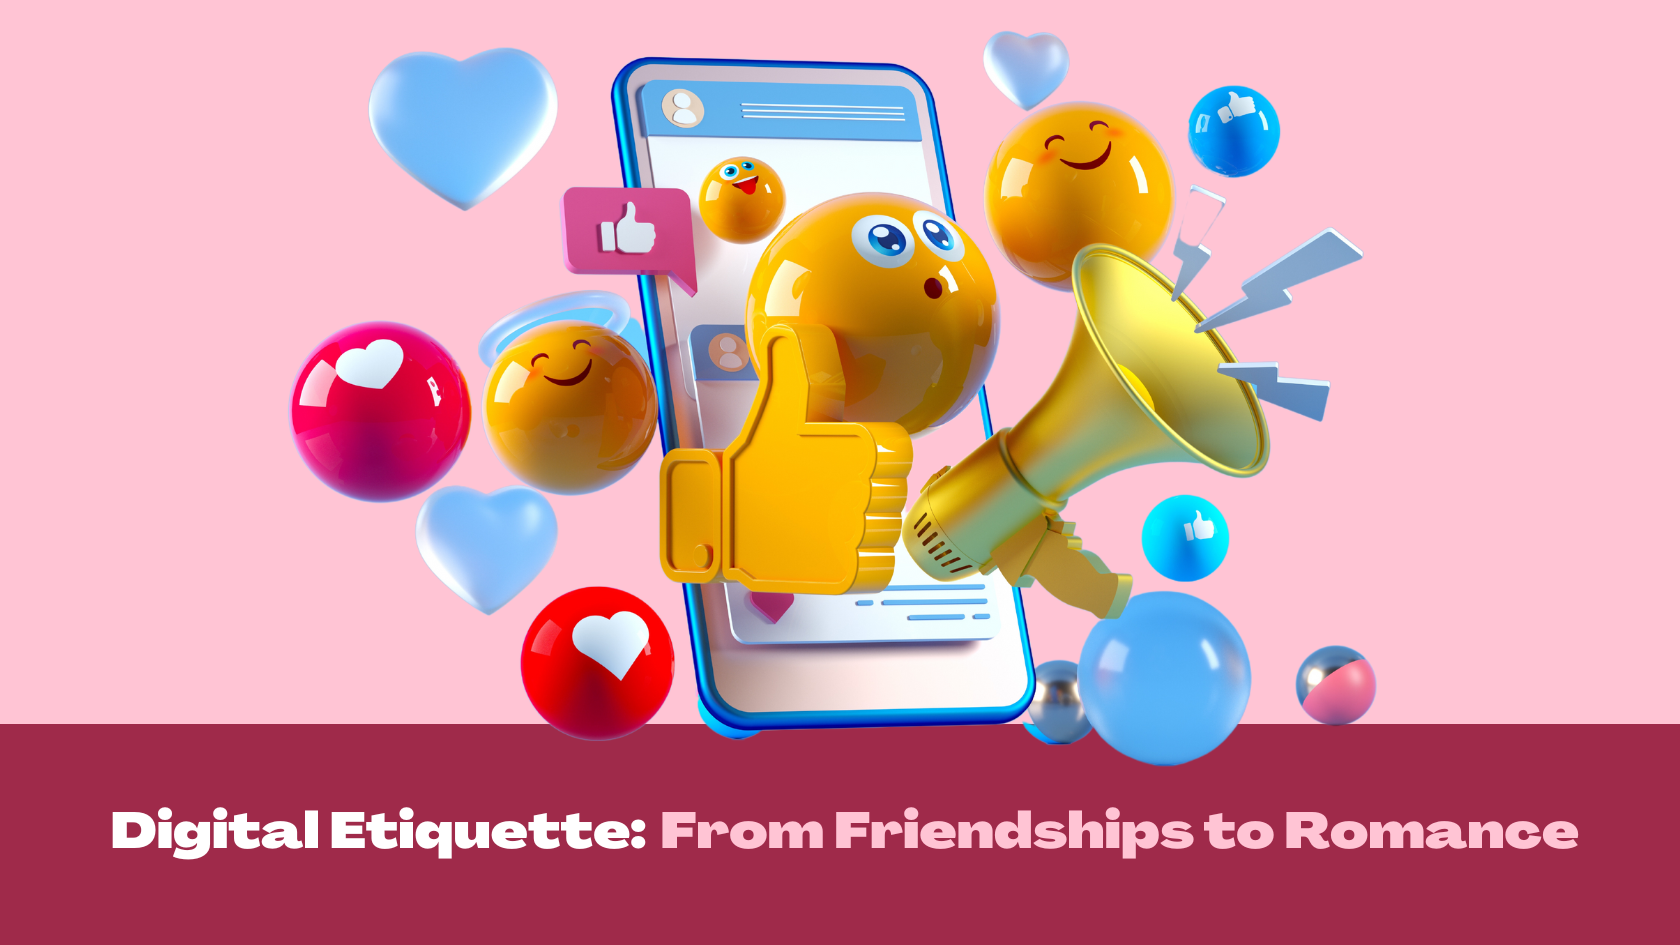 Digital Etiquette: From Friendships to Romance